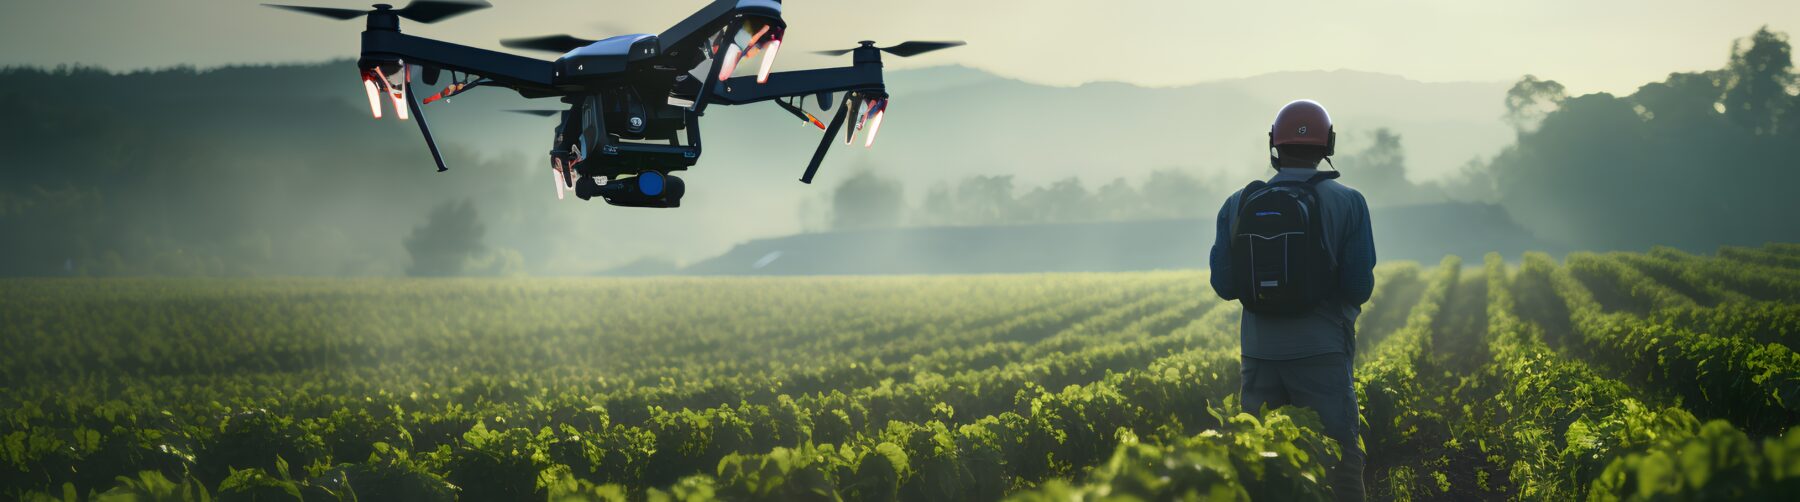 [This image depicts a scene set in a field during what appears to be early morning or late afternoon, judging by the soft lighting. In the foreground, there is a large, professional-looking drone hovering in the air with red lights on its arms, suggesting it's active. The drone has four rotors and is equipped with a camera and other sensors. It is facing a person who is standing in the middle ground, observing or controlling it. This individual is wearing a dark helmet, a blue jacket, and is carrying a backpack, indicating they might be a professional drone operator. The person is facing away from the camera, looking at the drone. The background features rows of crops extending towards the horizon, with trees and a hazy mountain range in the far distance, all bathed in a warm, hazy light that suggests either a sunrise or sunset ambiance. The overall setting suggests that the drone may be used for agricultural purposes, perhaps surveying or monitoring the crops.] (Text generated by ChatGPT4)